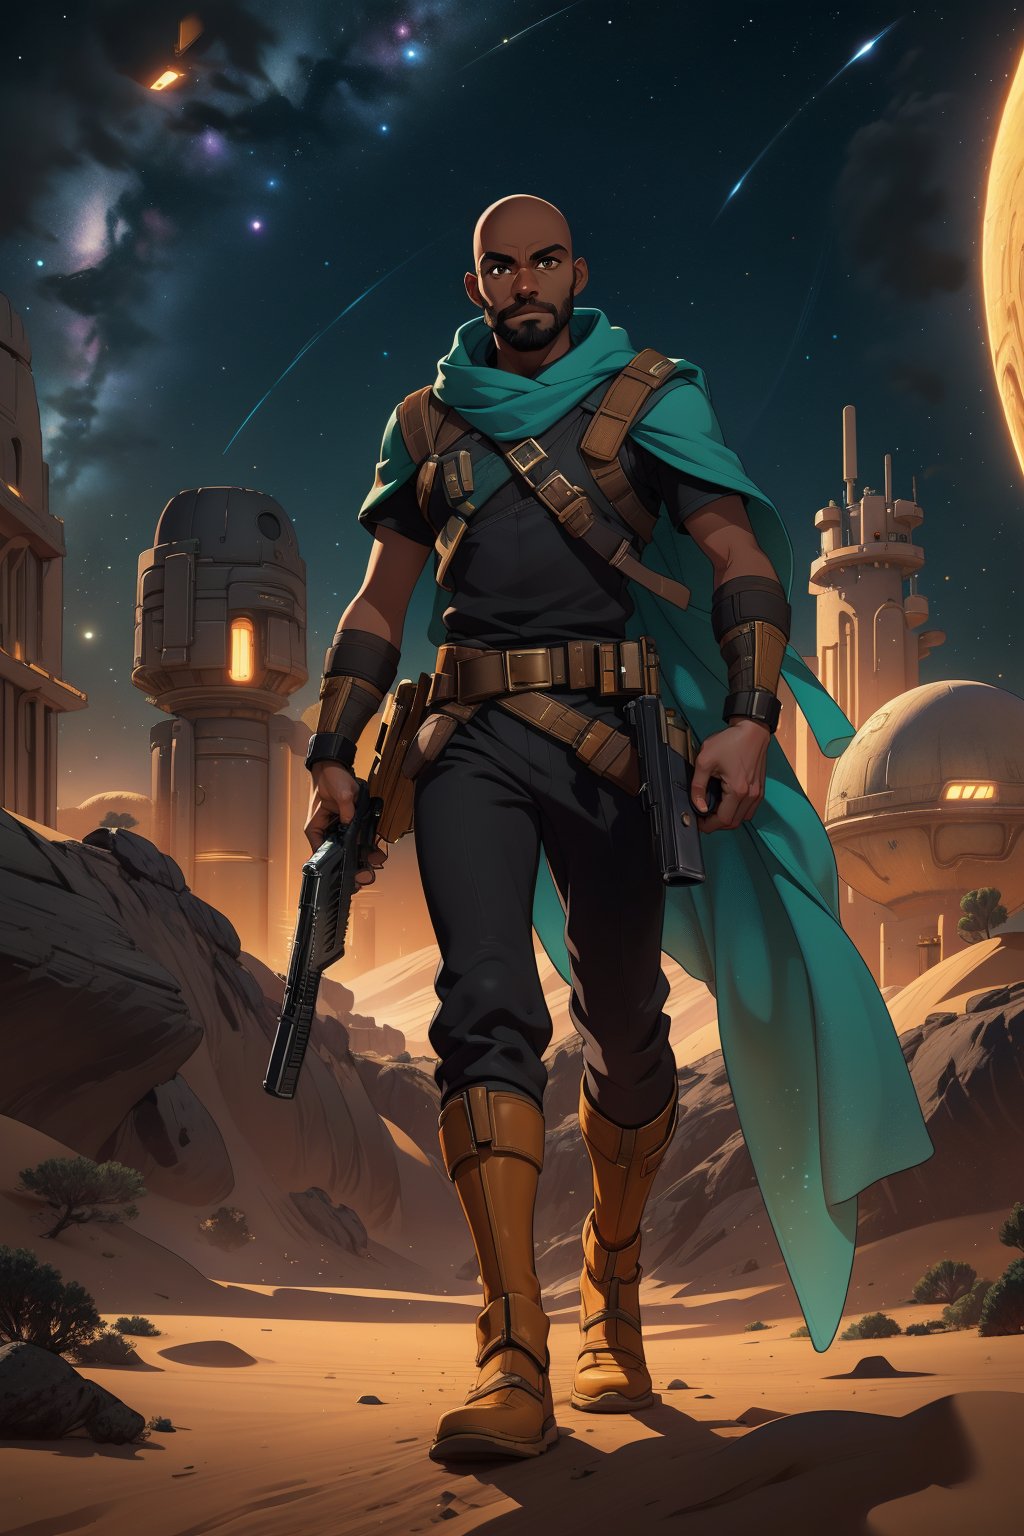 Shunkaha, a majestic black male, african american, dark skin, brown skin with perfect face and amber eyes, sporting a white beard, bald, walks confidently in the desert city of Mos Espa on Tatooine. He wears teal shirt and black long pants, handgun holstered at his right leg. Holding a large grey weapon in both hands, he exudes determination under dramatic night lighting, with rim lighting highlighting his features against the starry night sky. The midjourney scenery is high-detailed, showcasing intricate sand dunes and cityscape, set against the vast blackness of space.,agawa